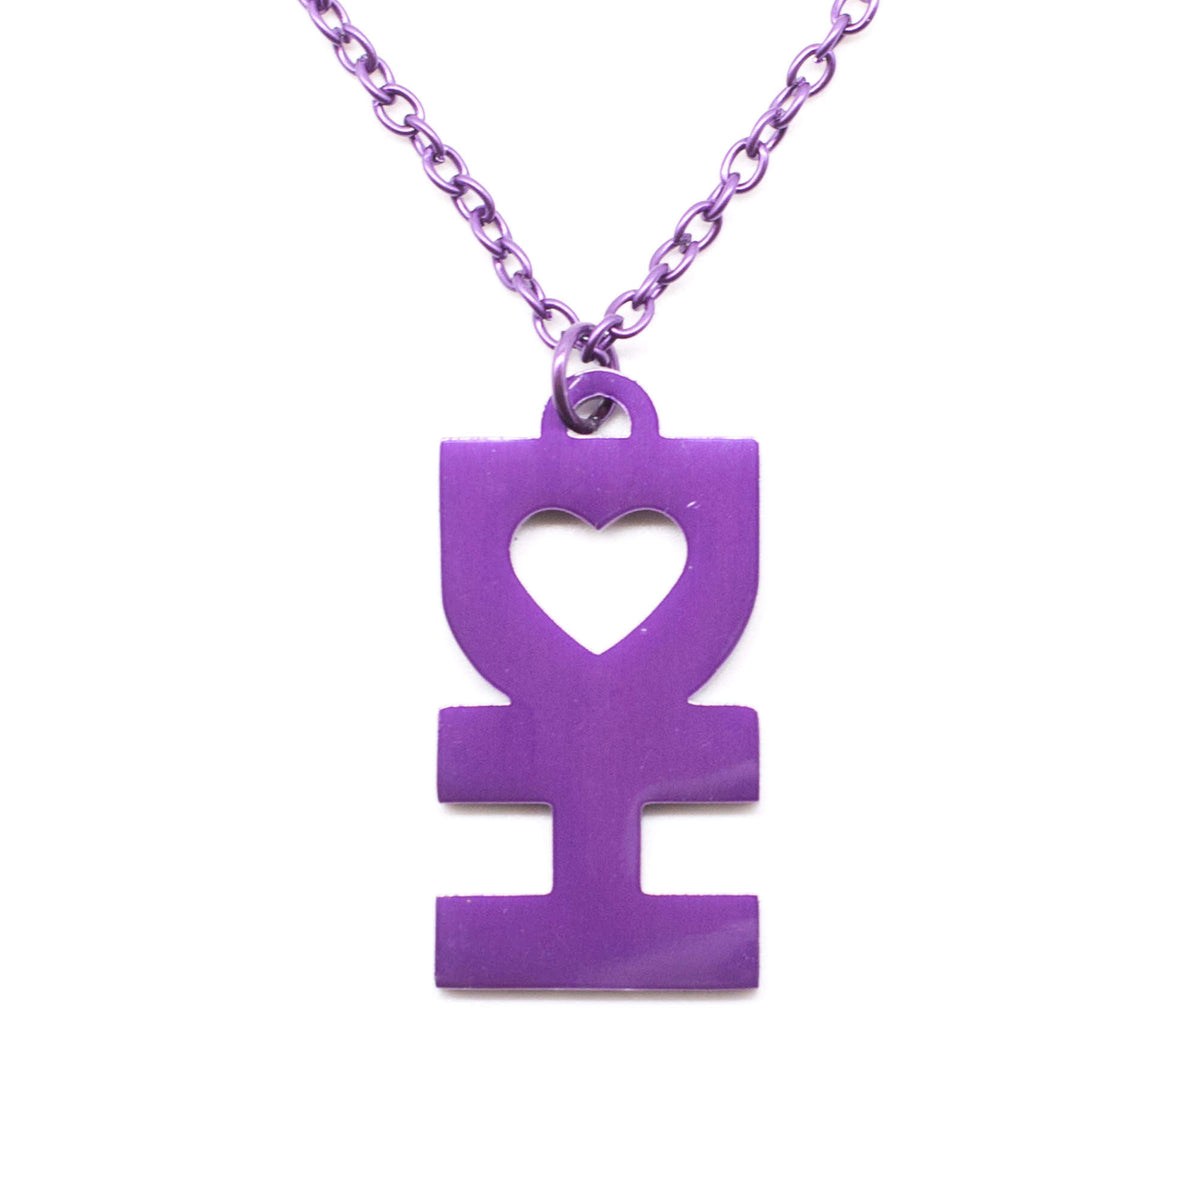 DH MAN NECKLACE IN GLOSSY PURPLE